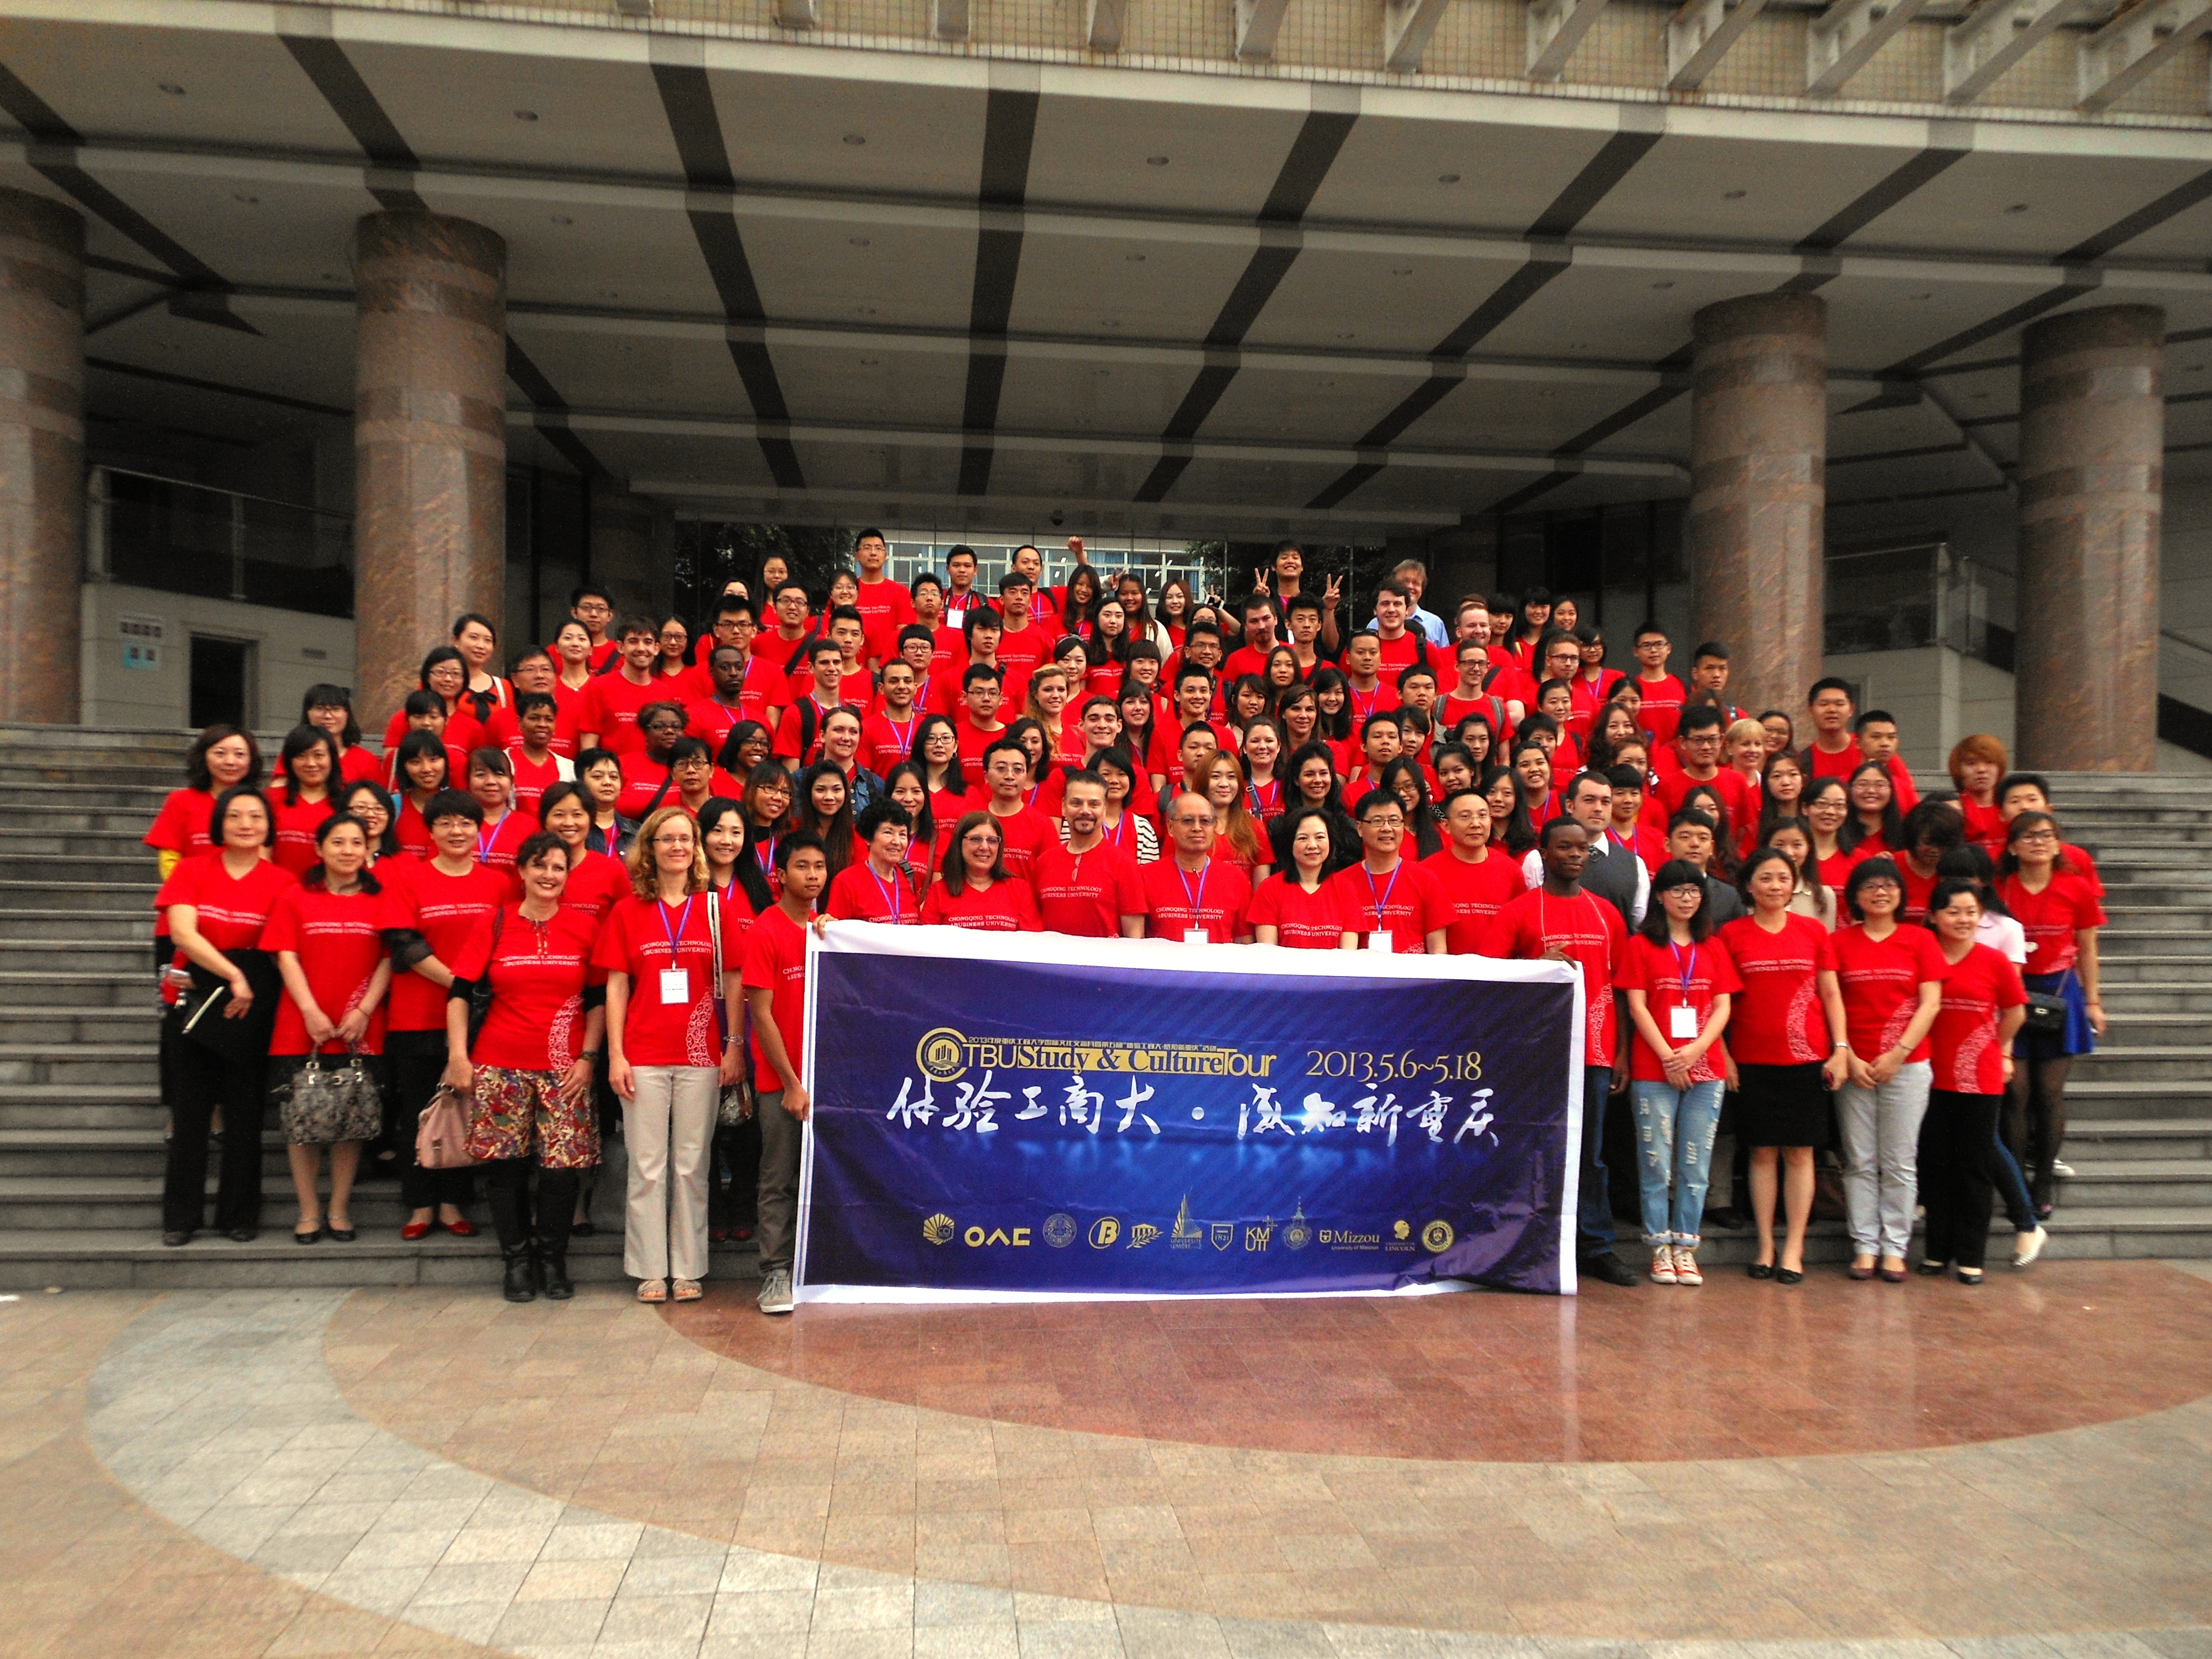 Natalie (bottom left) and Students at CTBU Culture Week, China